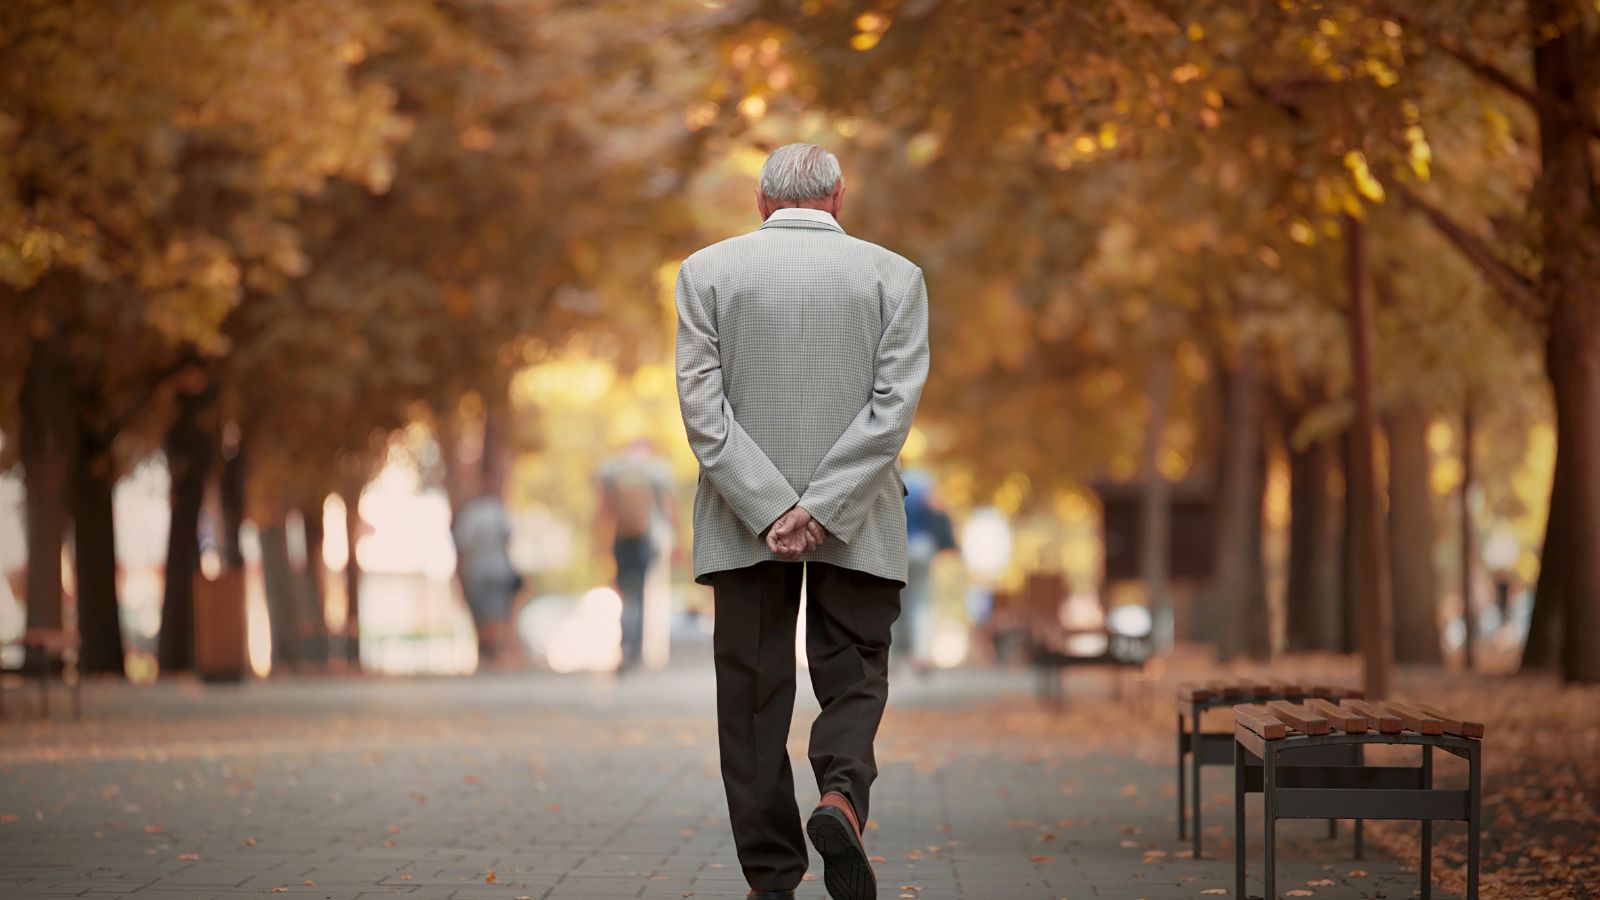 <p>Men over 60 who have just retired suddenly find themselves with a lot of time on their hands. They want to spend as much of it as possible with their families, but they could still be busy working. Because they are spending time alone that they imagined they would spend with their children, they feel lonely.</p>